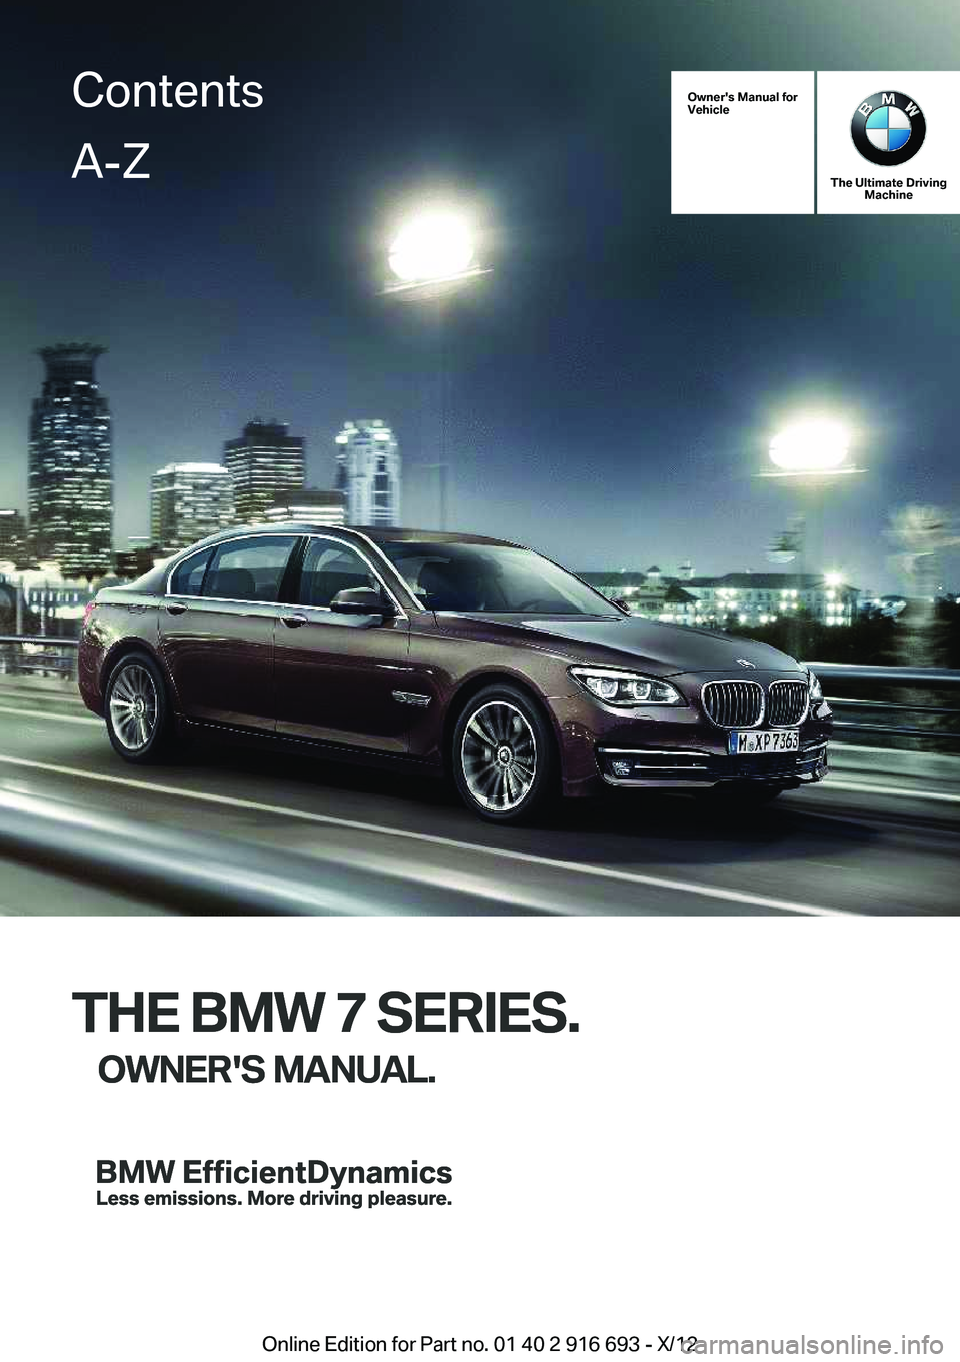 BMW 750LI XDRIVE 2013  Owners Manual Owner's Manual for
Vehicle
THE BMW 7 SERIES.
OWNER'S MANUAL.
The Ultimate Driving Machine
THE BMW 7 SERIES.
OWNER'S MANUAL.
ContentsA-Z
Online Edition for Part no. 01 40 2 916 693 - X/12  